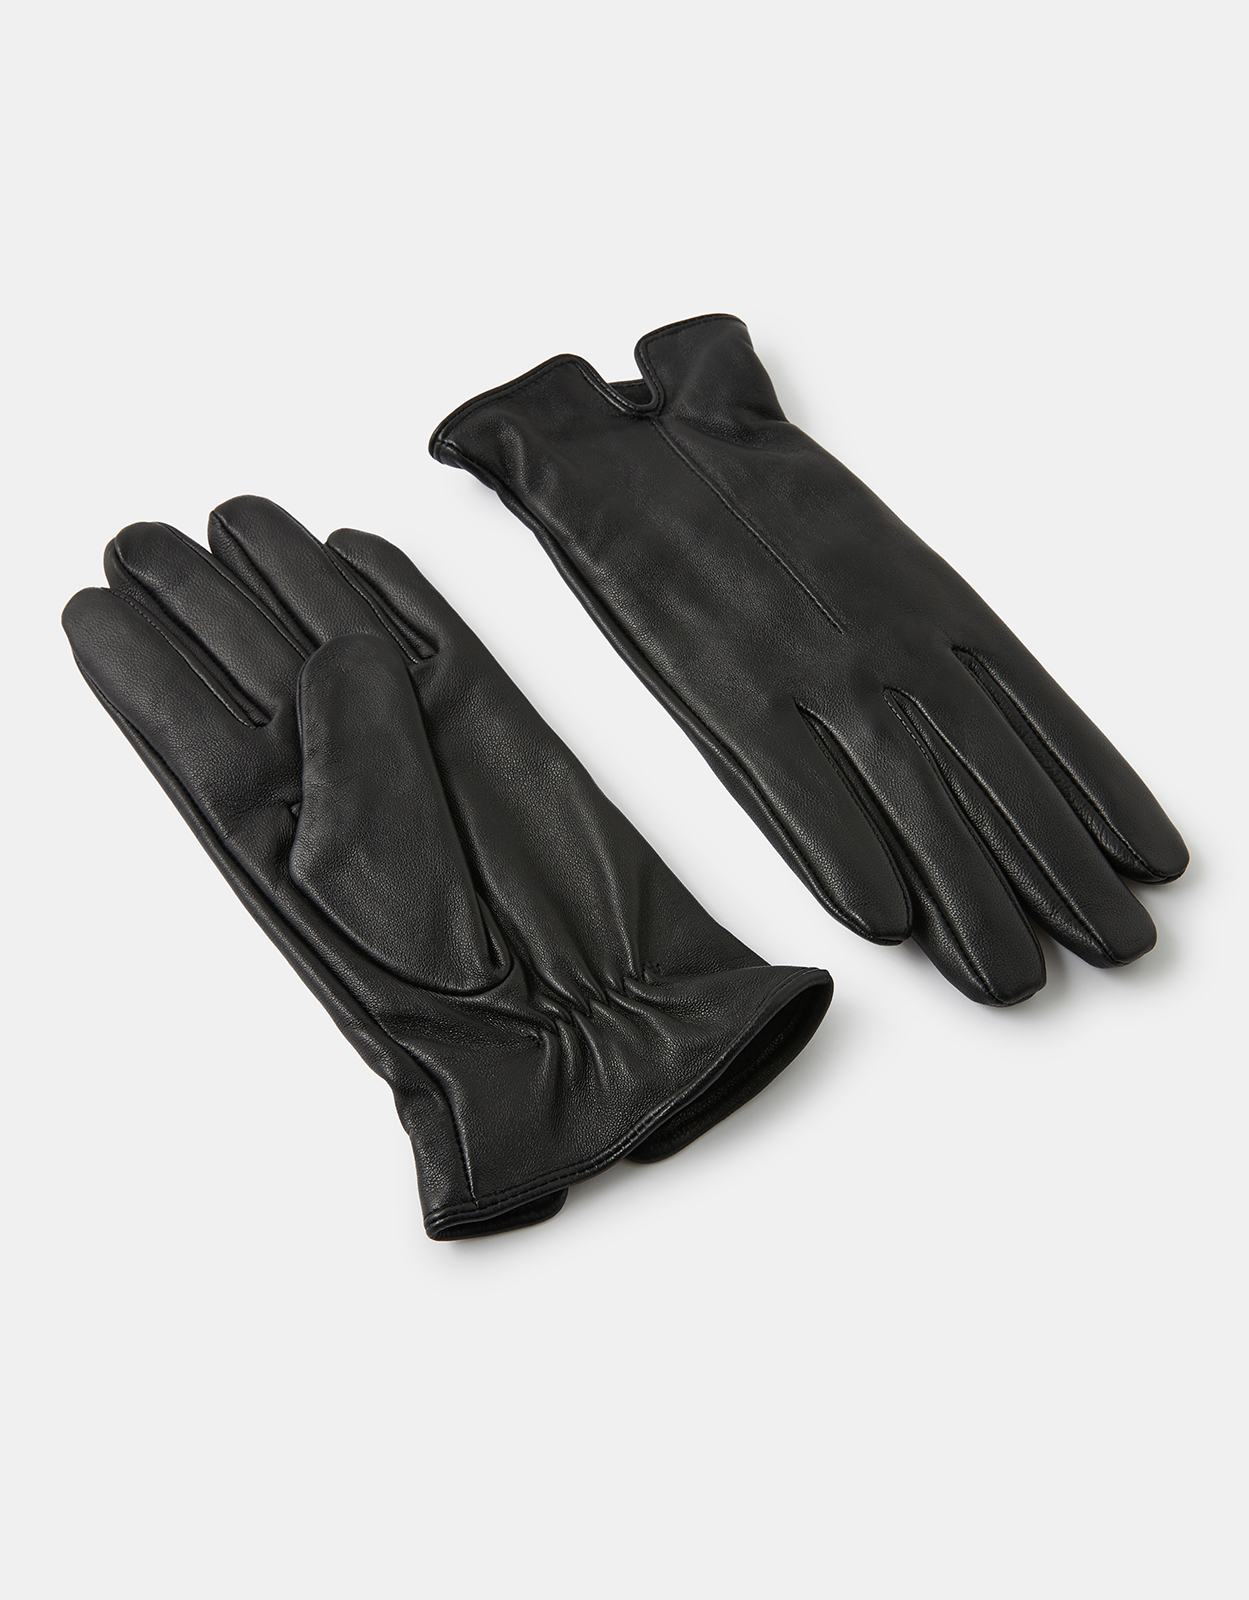 Accessorize Women's Luxe Leather Gloves Black, Size: S / M